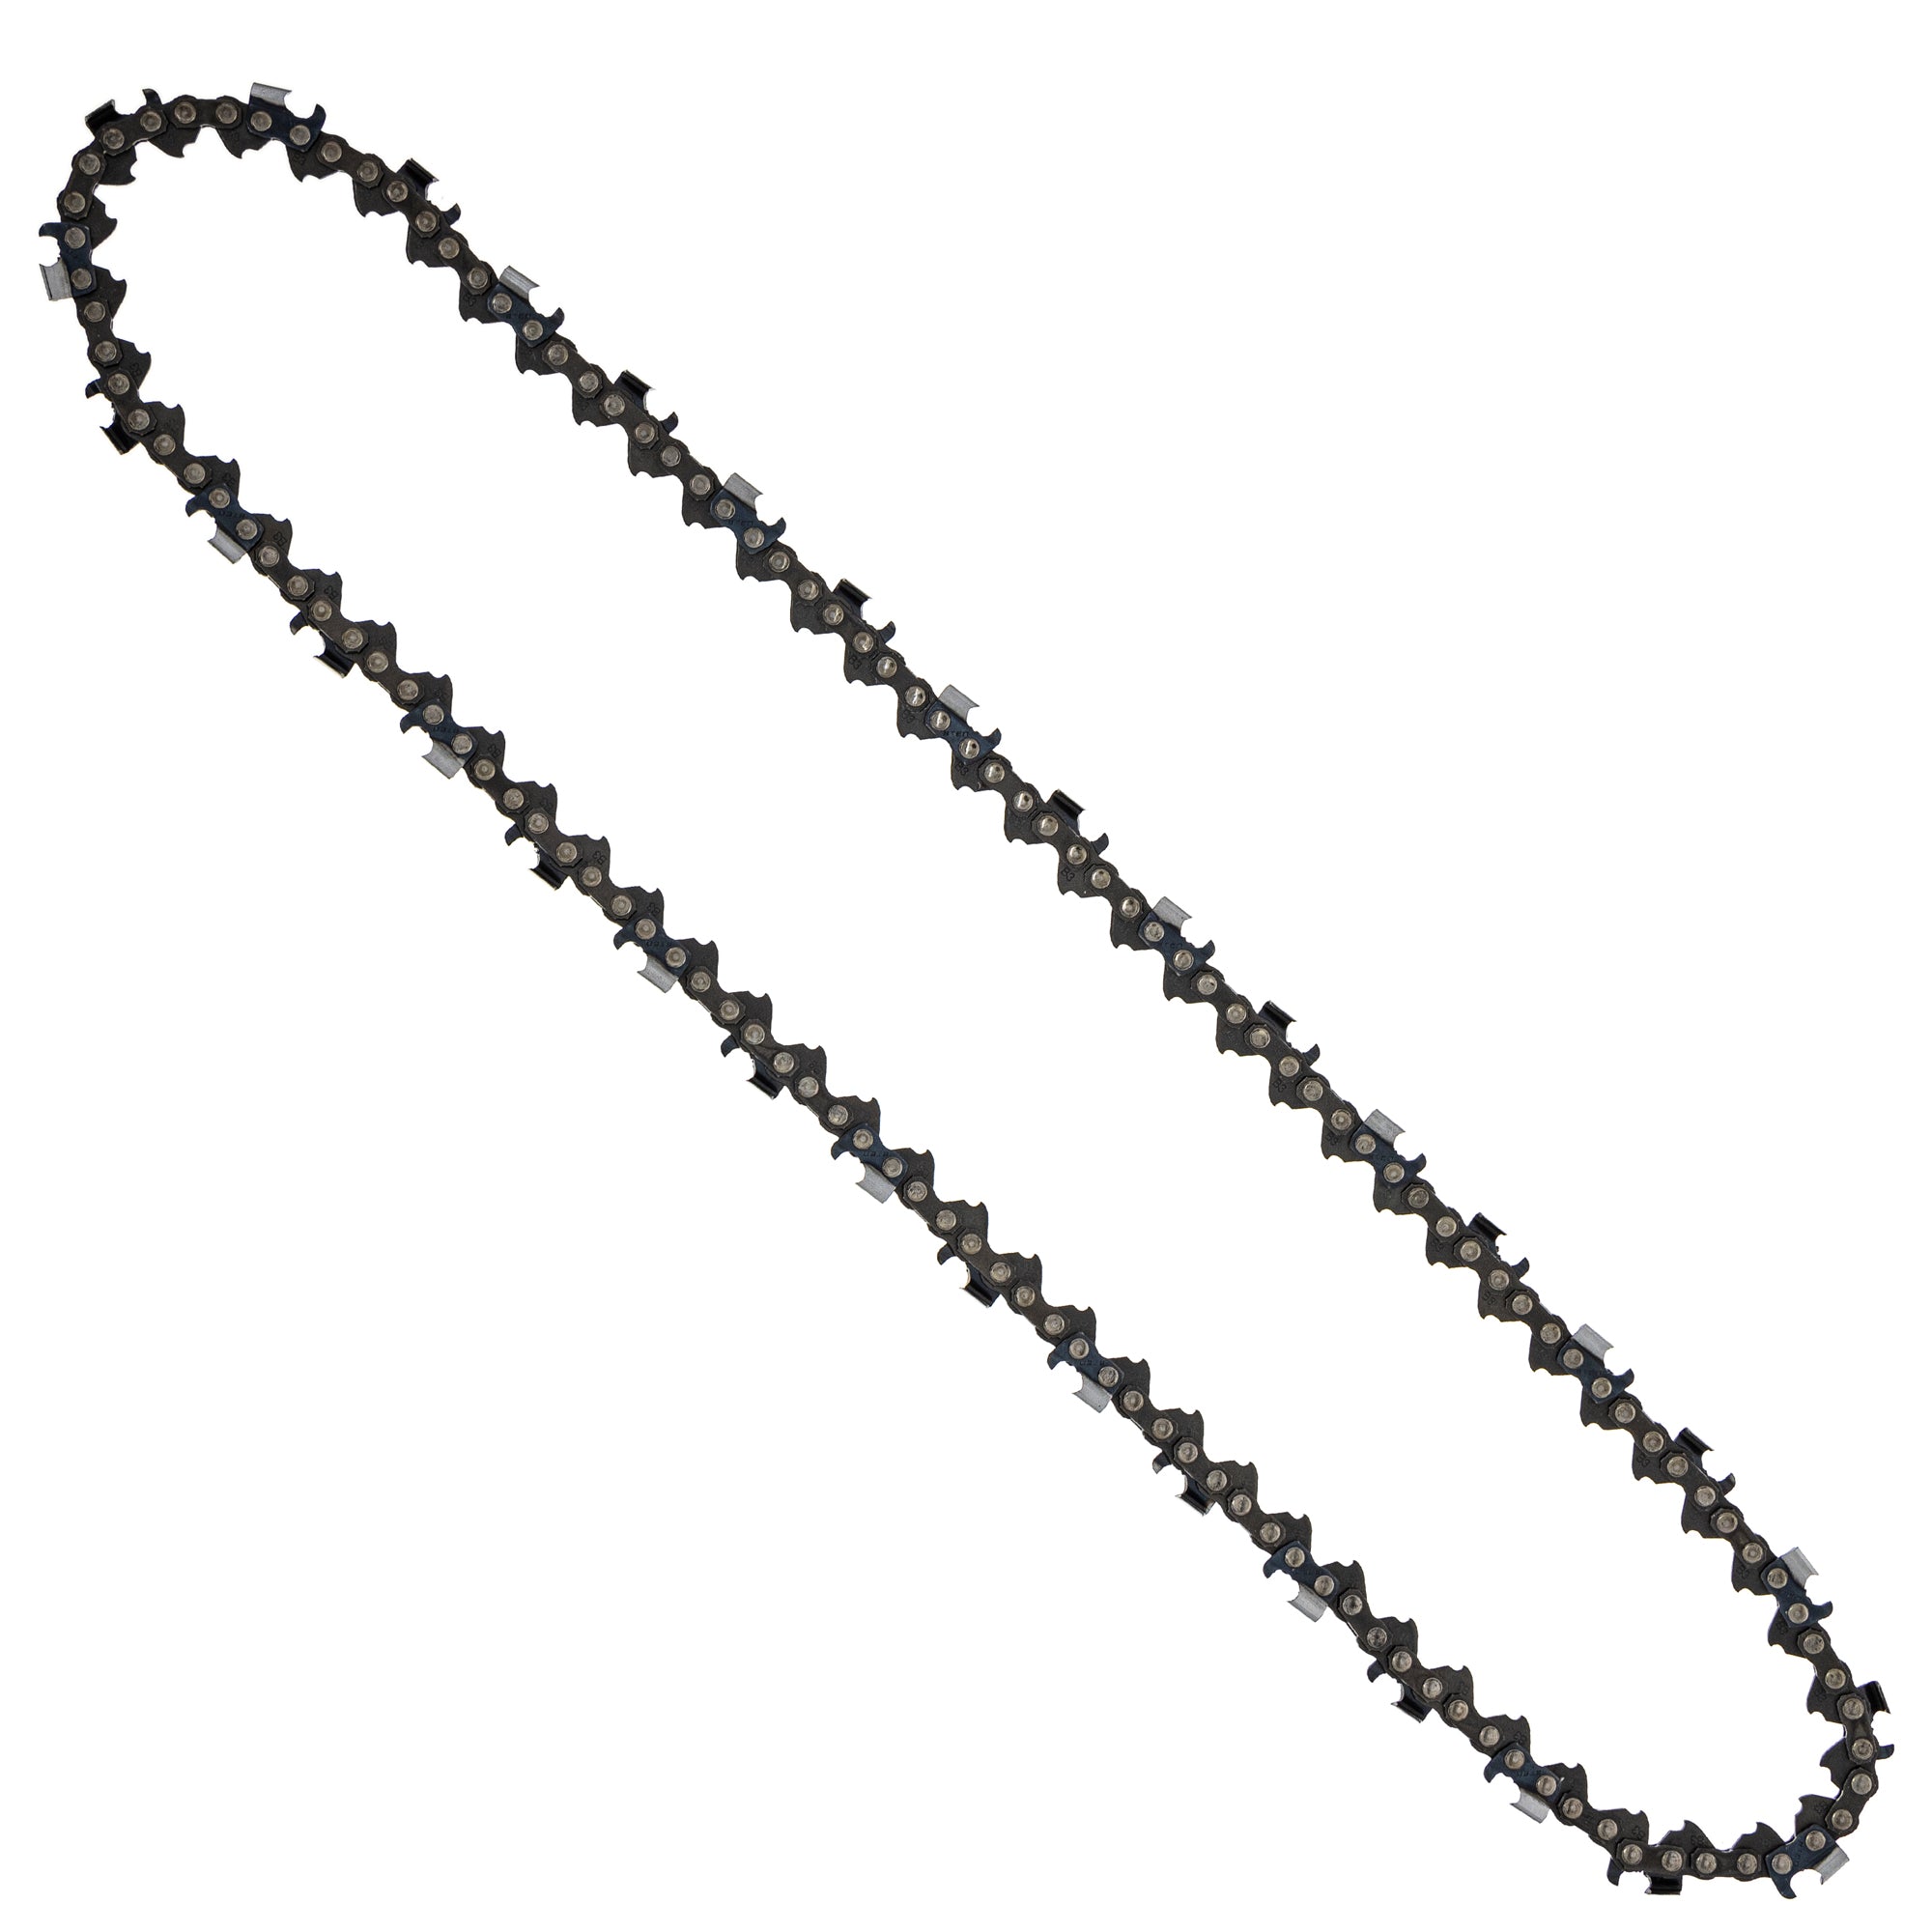 Chainsaw Chain 18 Inch .063 .325 68DL for zOTHER Stens Oregon MS 25 070 025 8TEN 810-CCC2293H